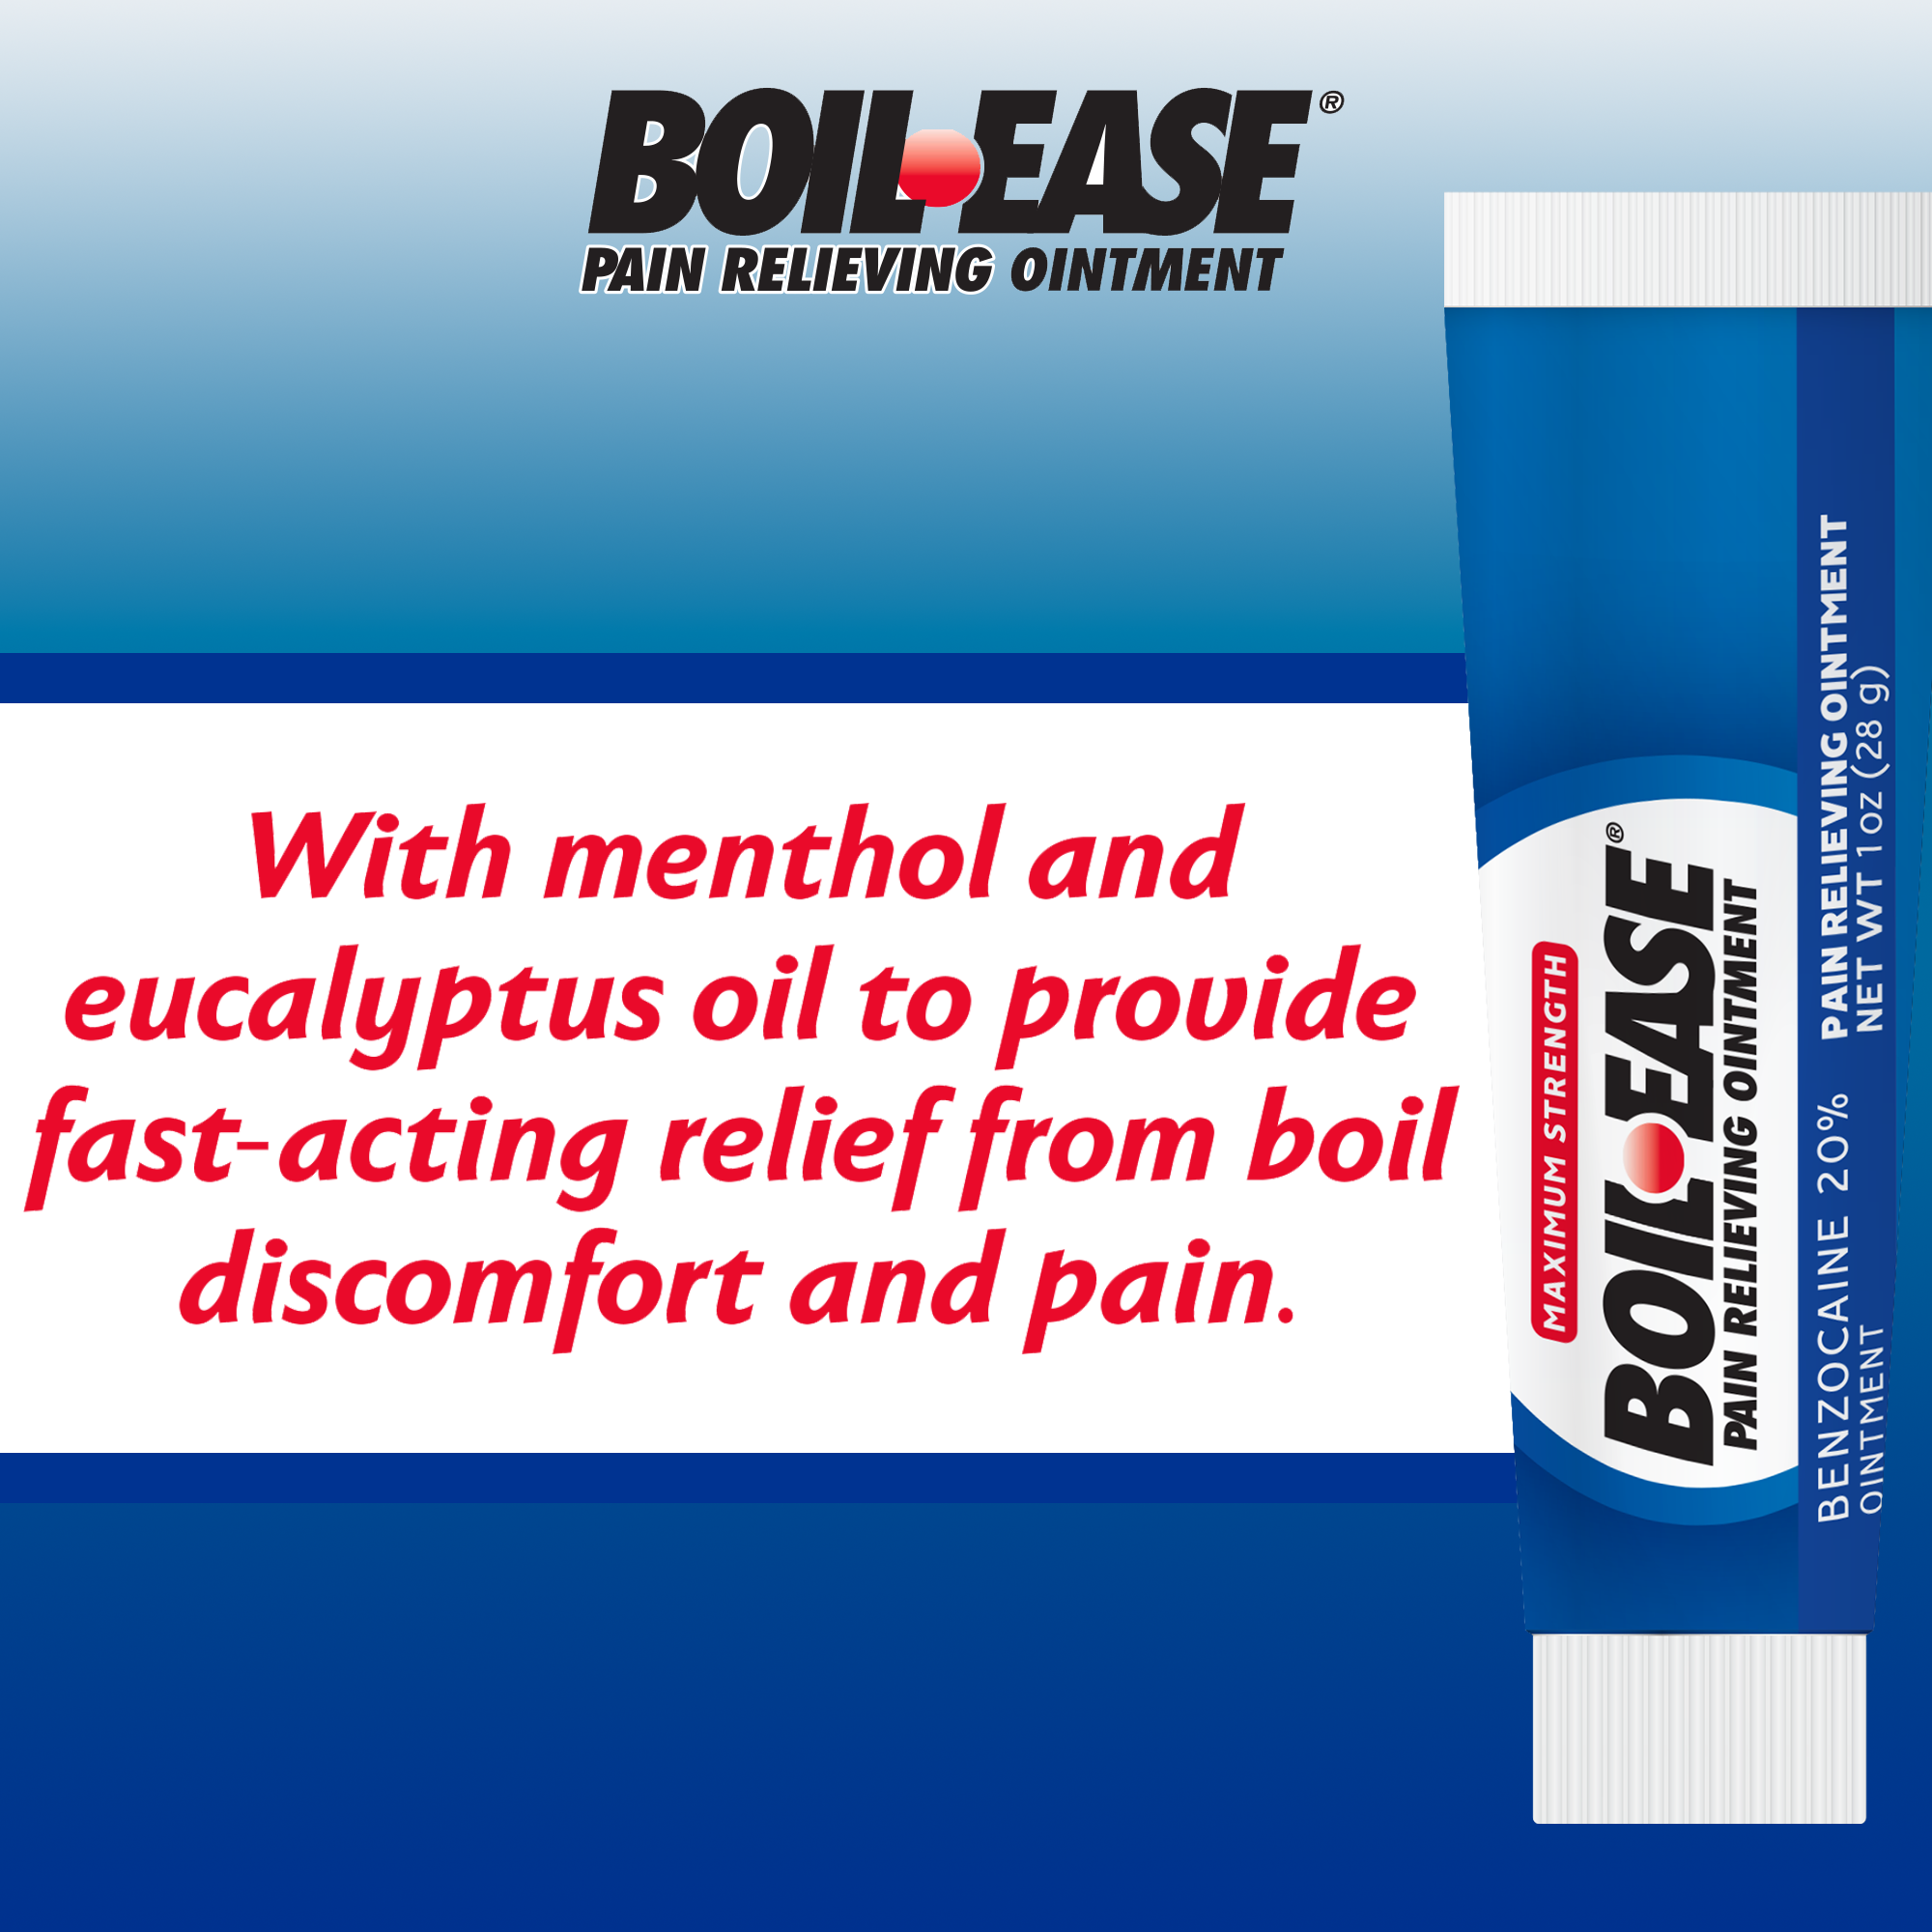 Boil-Ease Maximum Strength Pain Relieving Ointment, 1 Oz - image 3 of 11